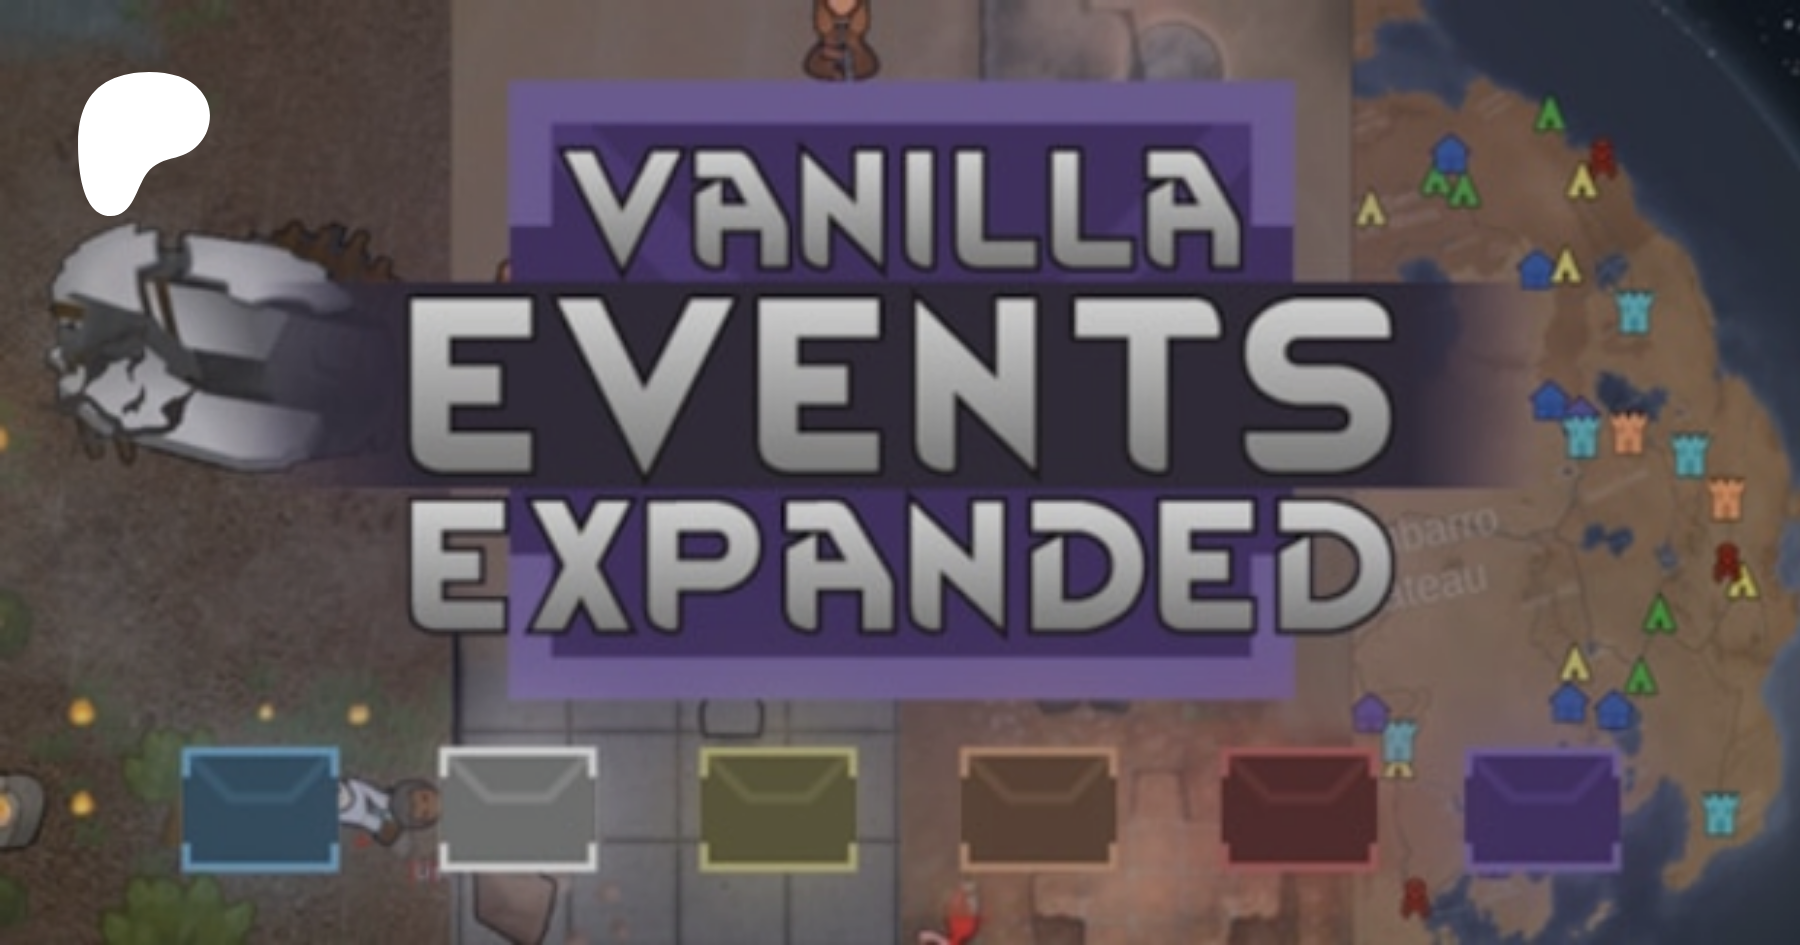 Rimworld vehicles expanded. Vanilla expanded. Моды RIMWORLD Vanilla expanded. Vanilla Factions expanded - Classical. Ванила экспандед римворлд.